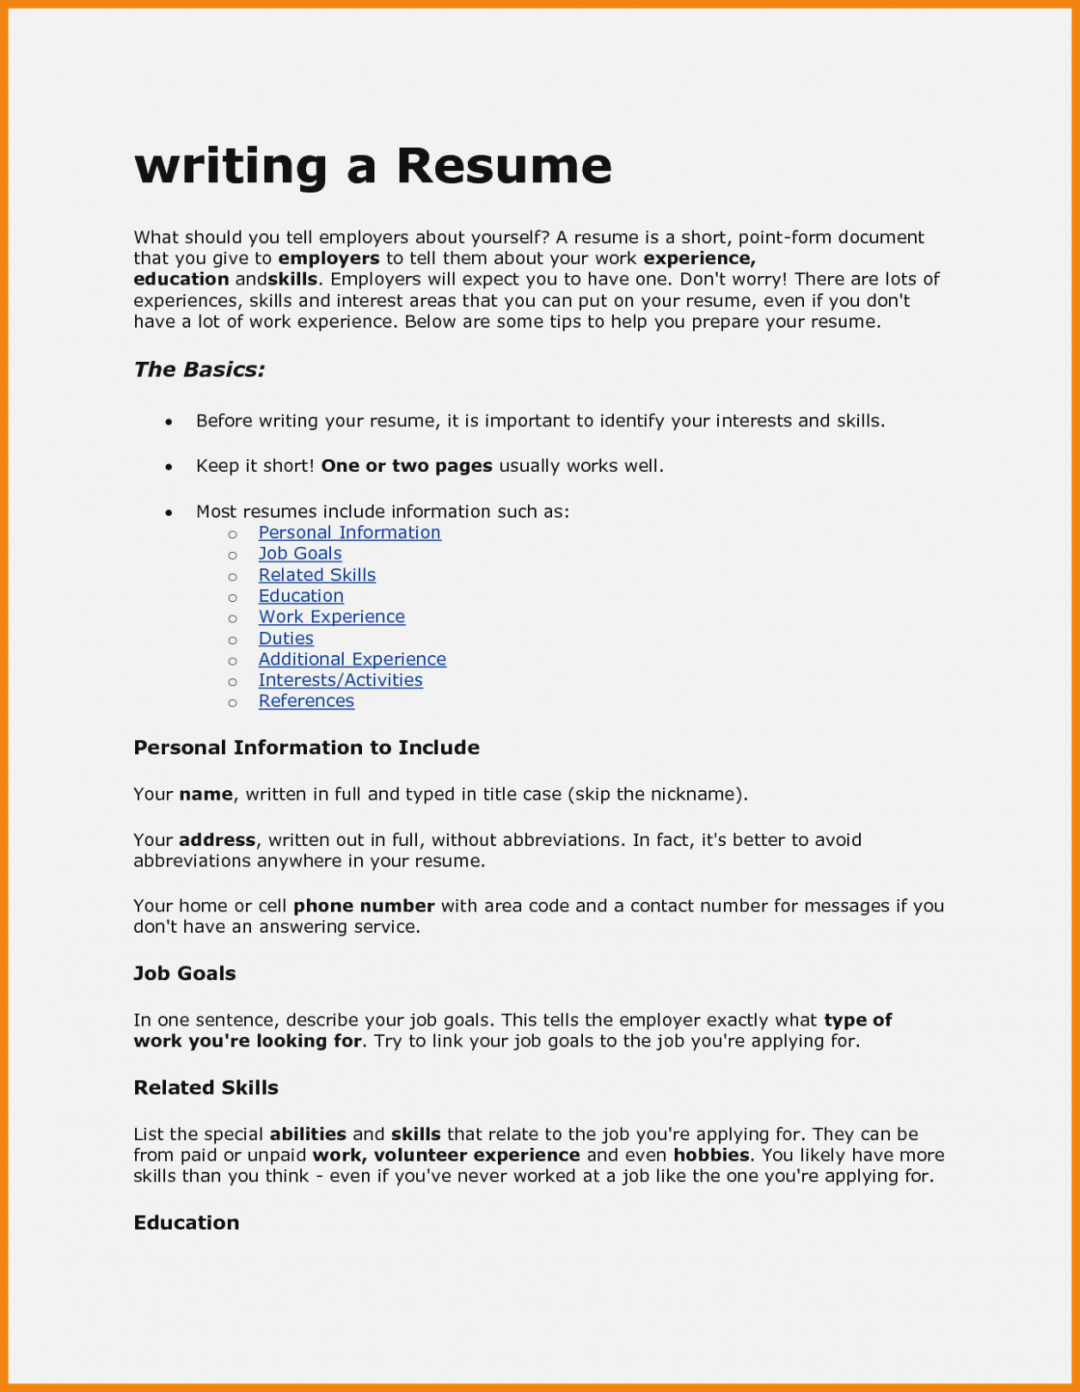 How To Write A Resume For A Job How To Write Resume For Job Fair How To Write Resume For Job Fair how to write a resume for a job|wikiresume.com